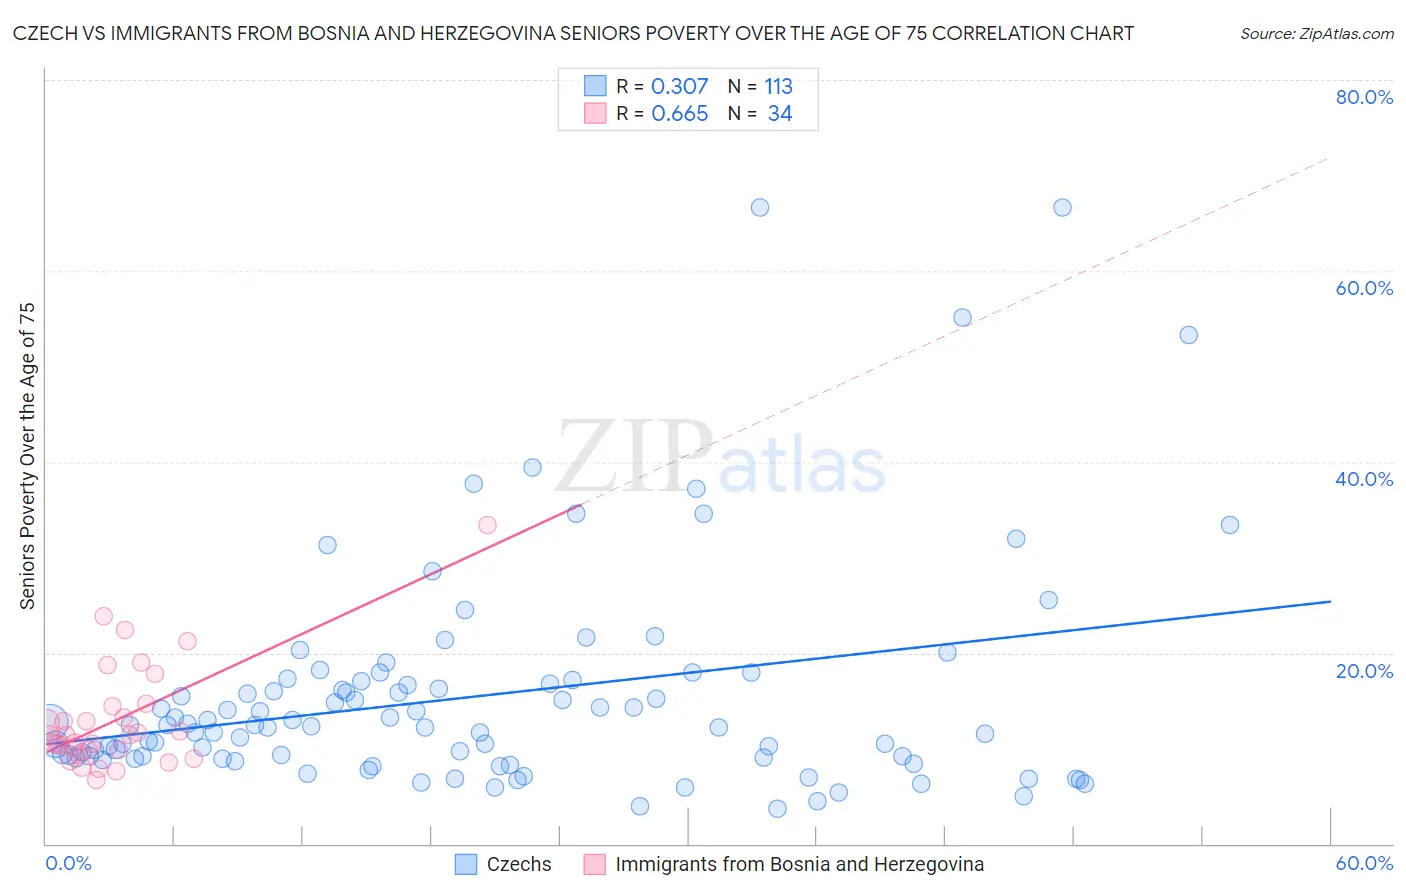 Czech vs Immigrants from Bosnia and Herzegovina Seniors Poverty Over the Age of 75